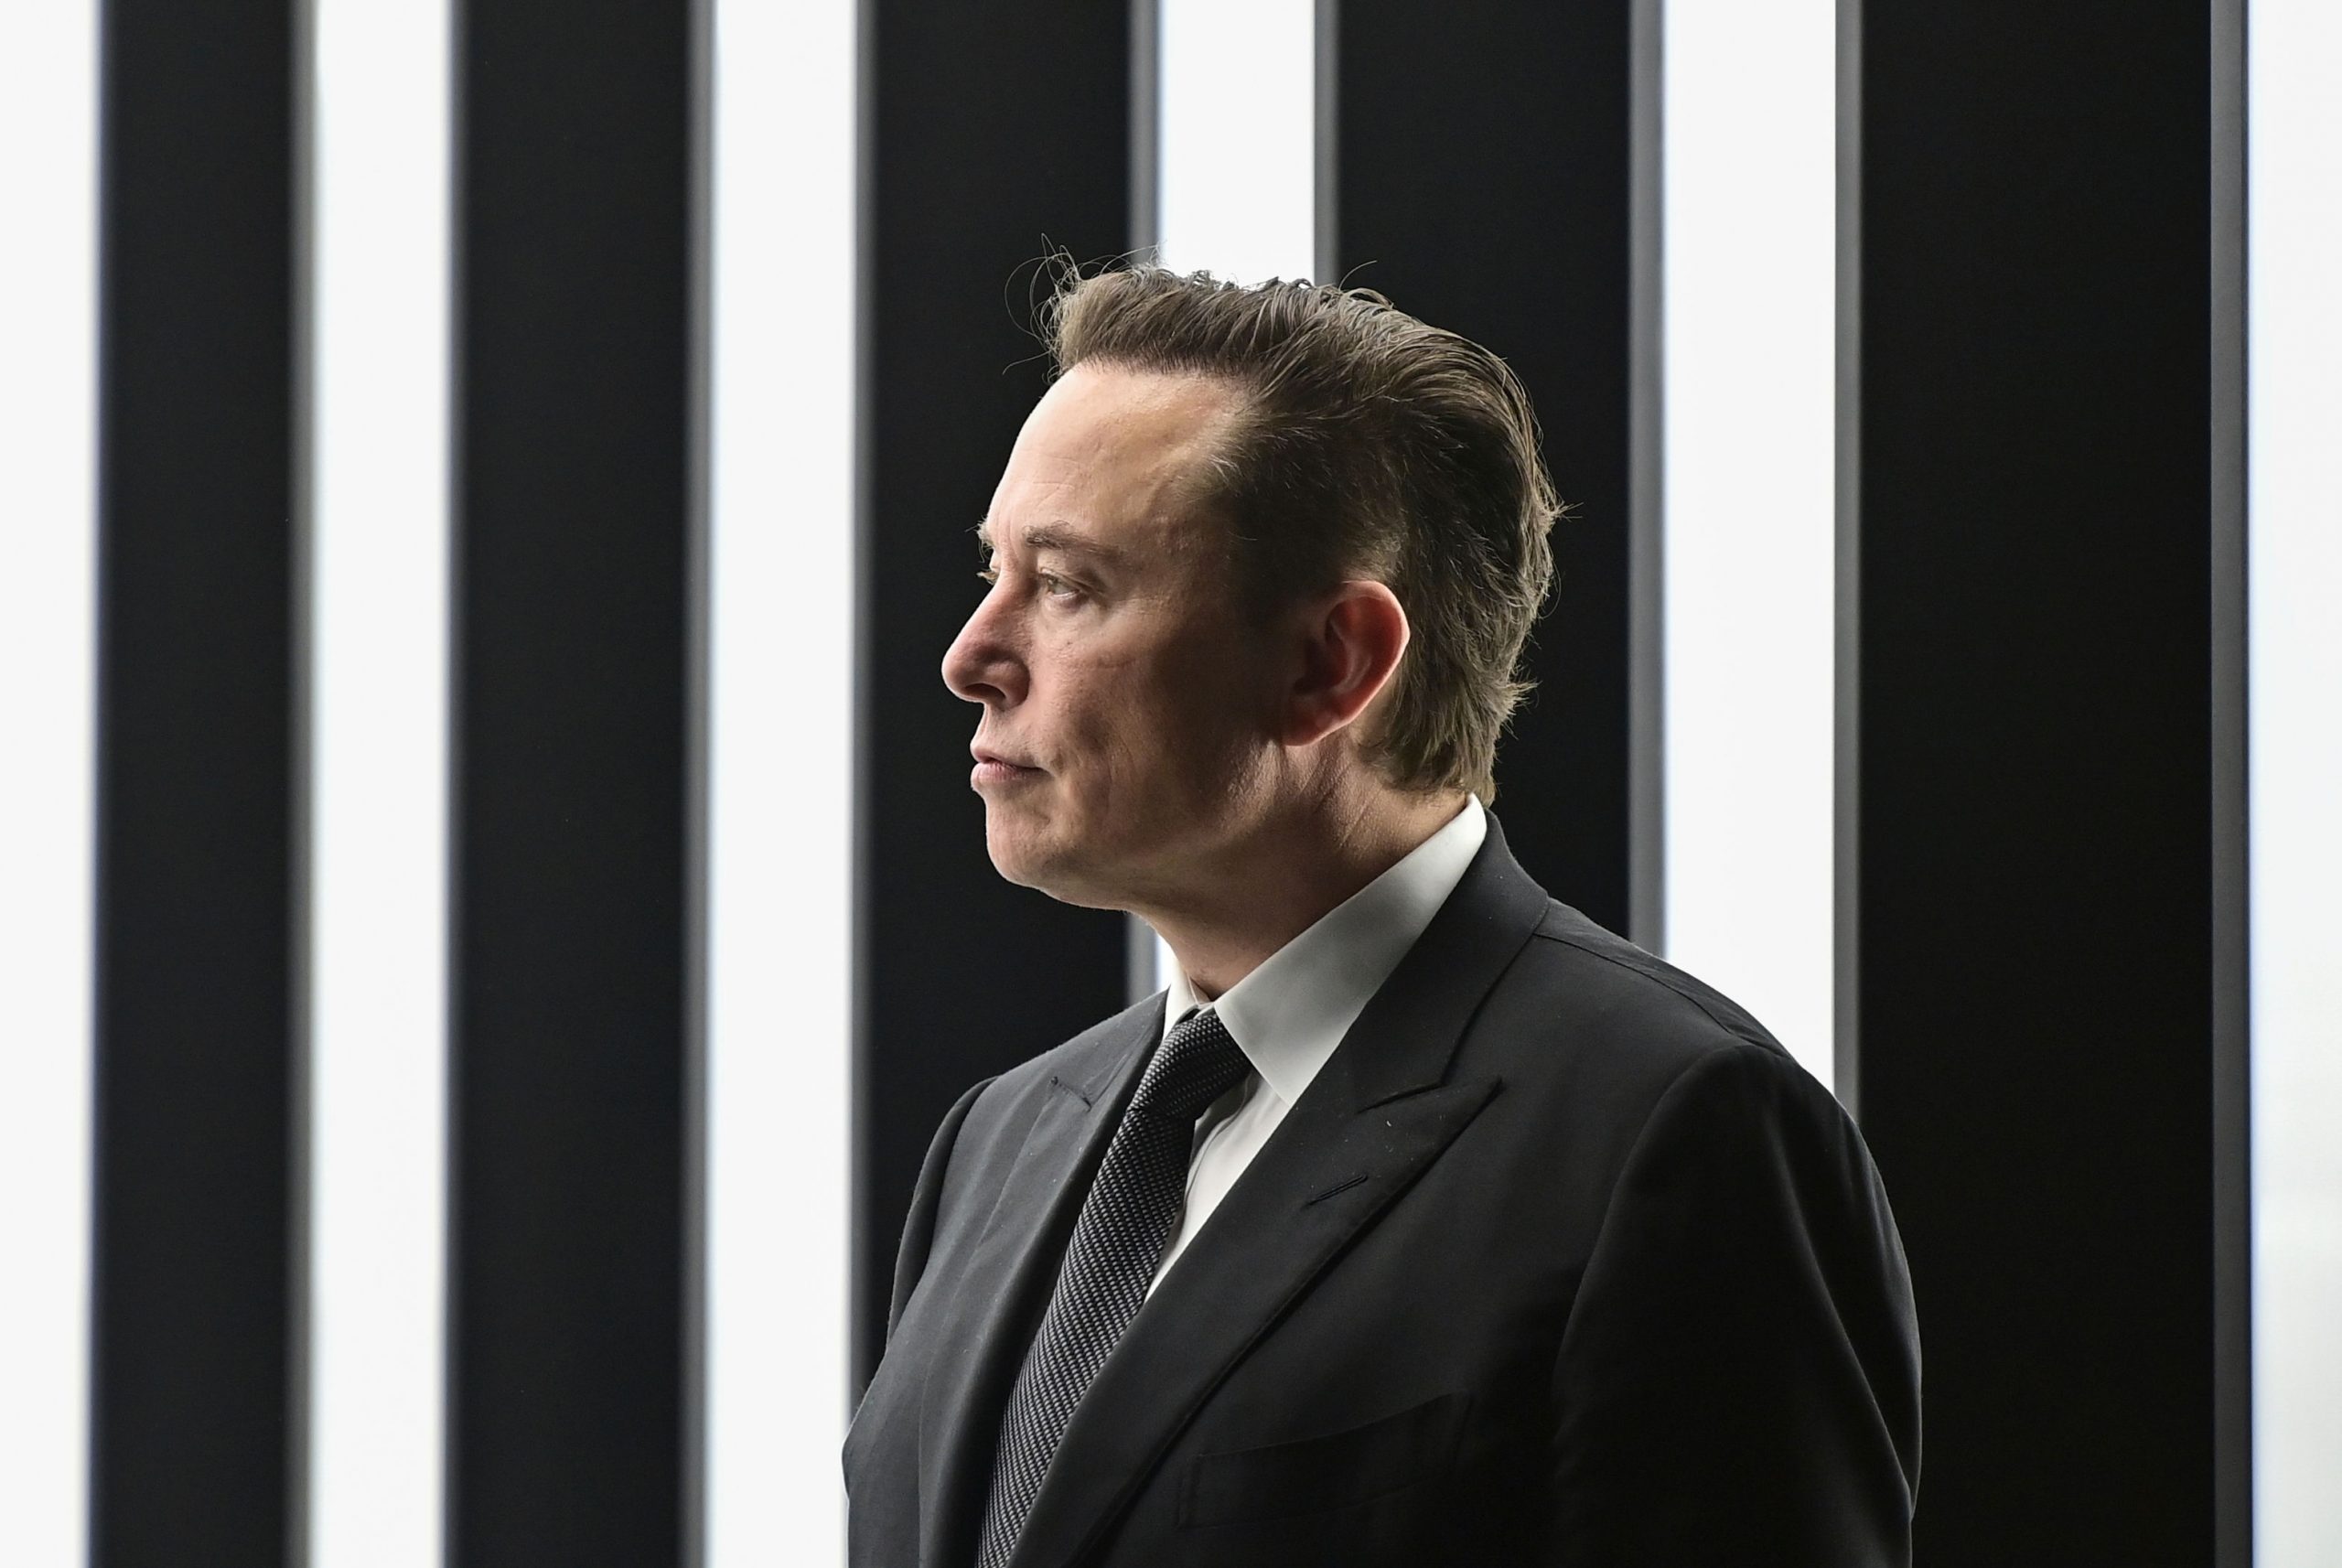 Elon Musk deposition by Twitter delayed, to take place on October 6-7